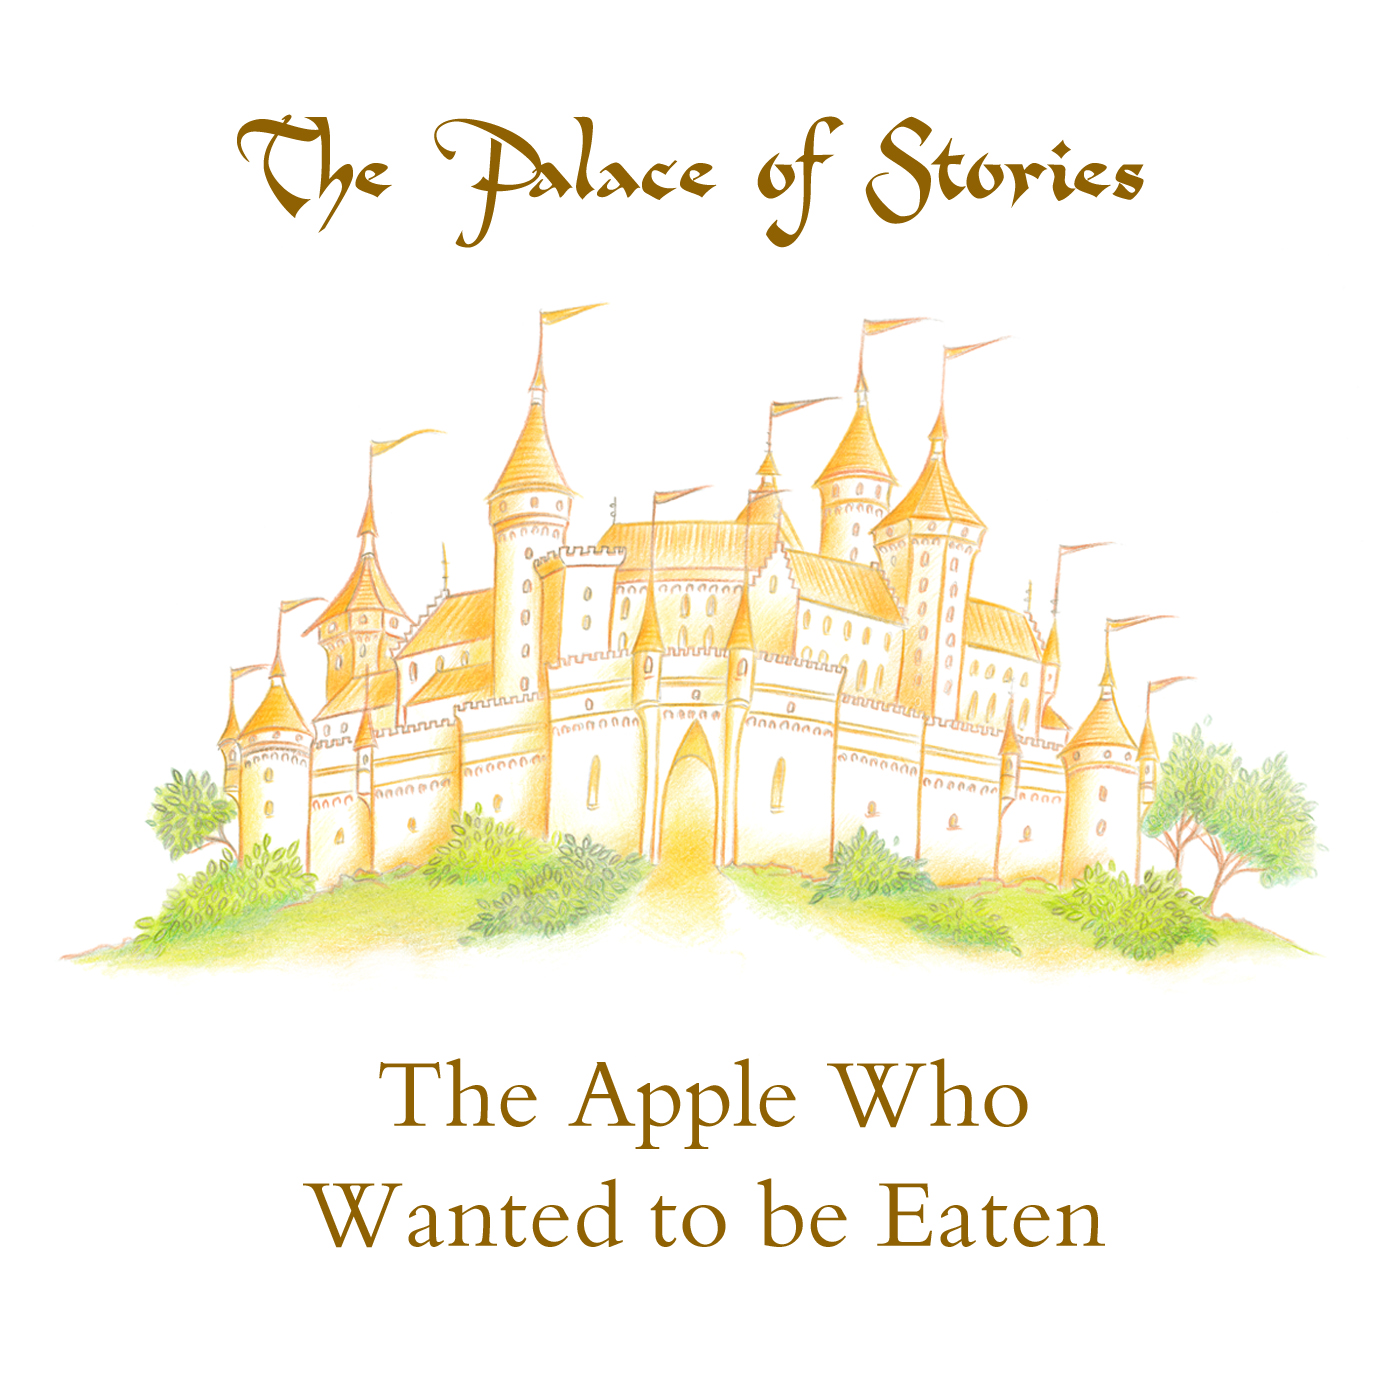 The Apple Who Wanted to be Eaten